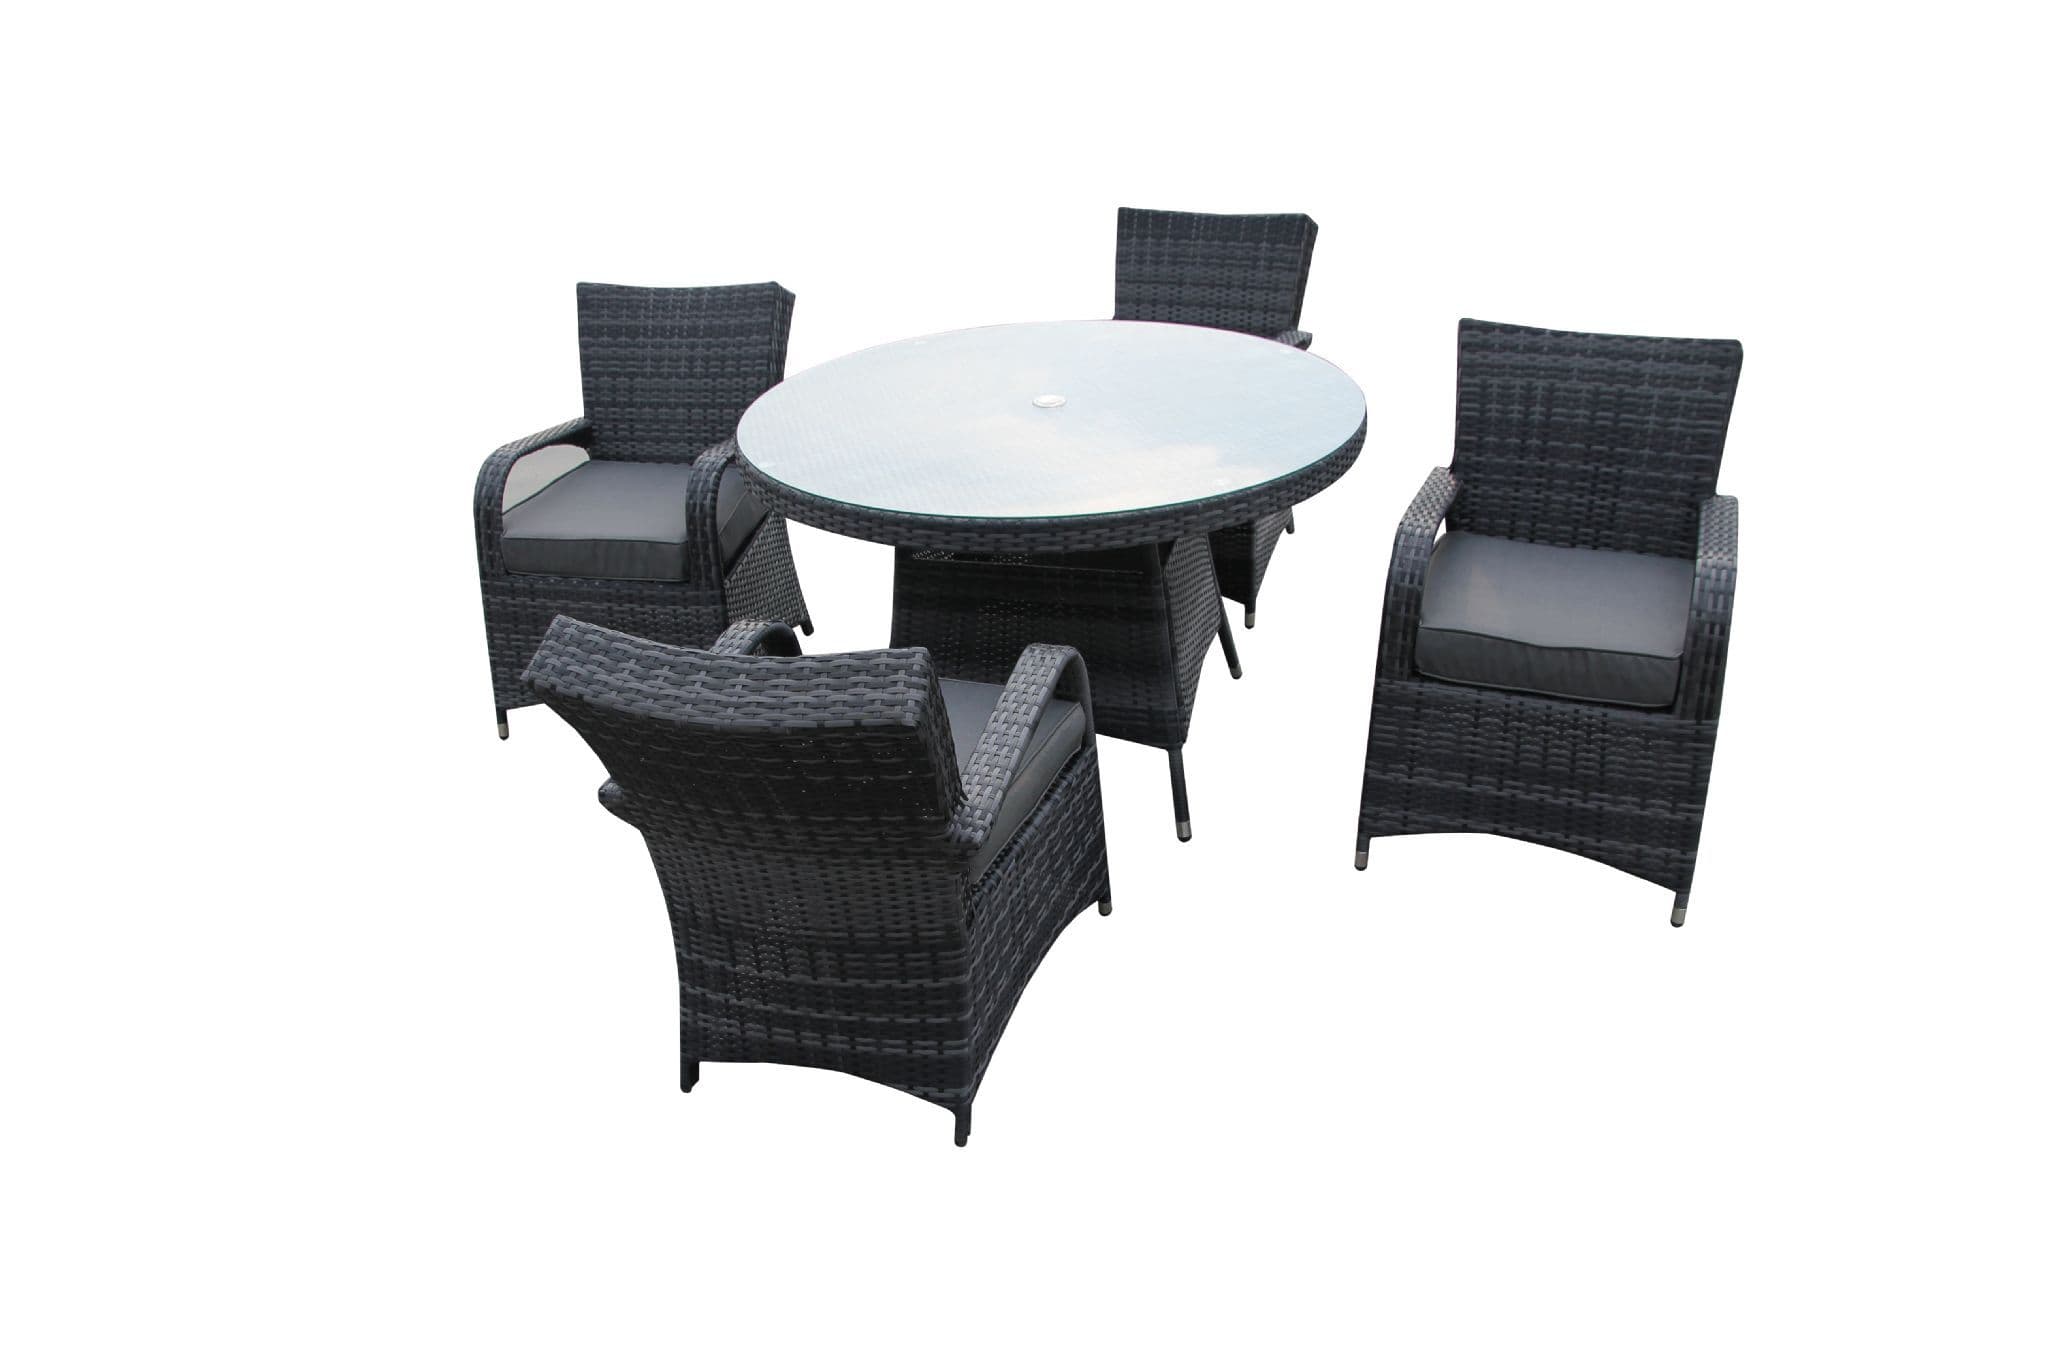 The Somet 4 Seater with Round Table